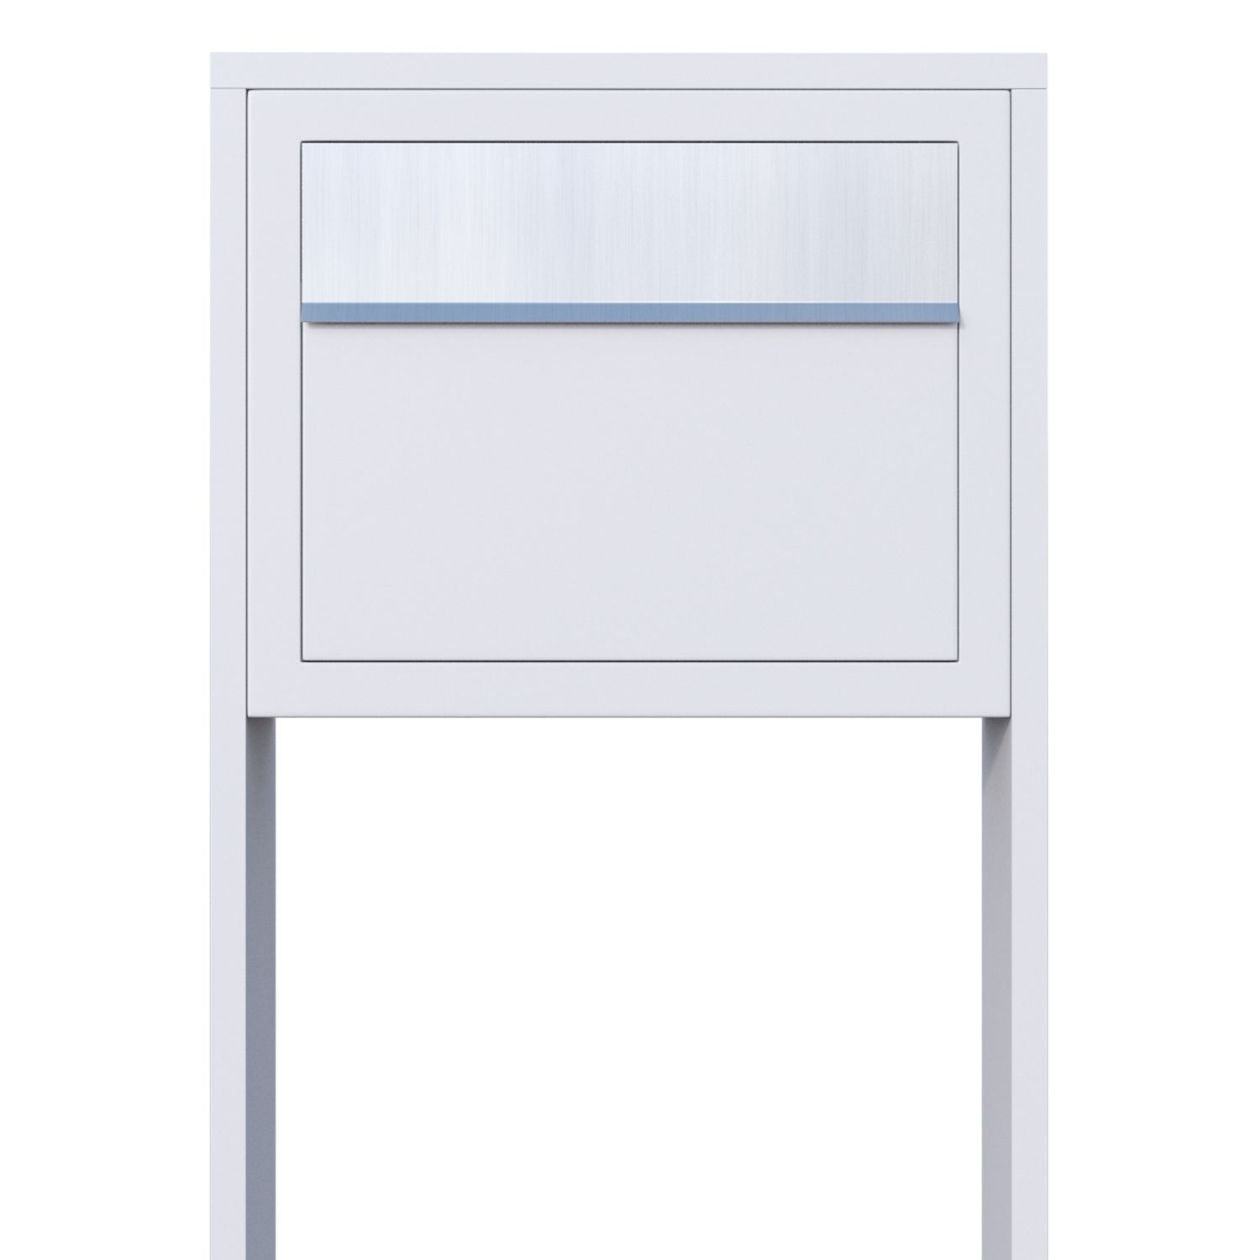 STAND ELEGANCE by Bravios - Modern post-mounted white mailbox with stainless steel flap